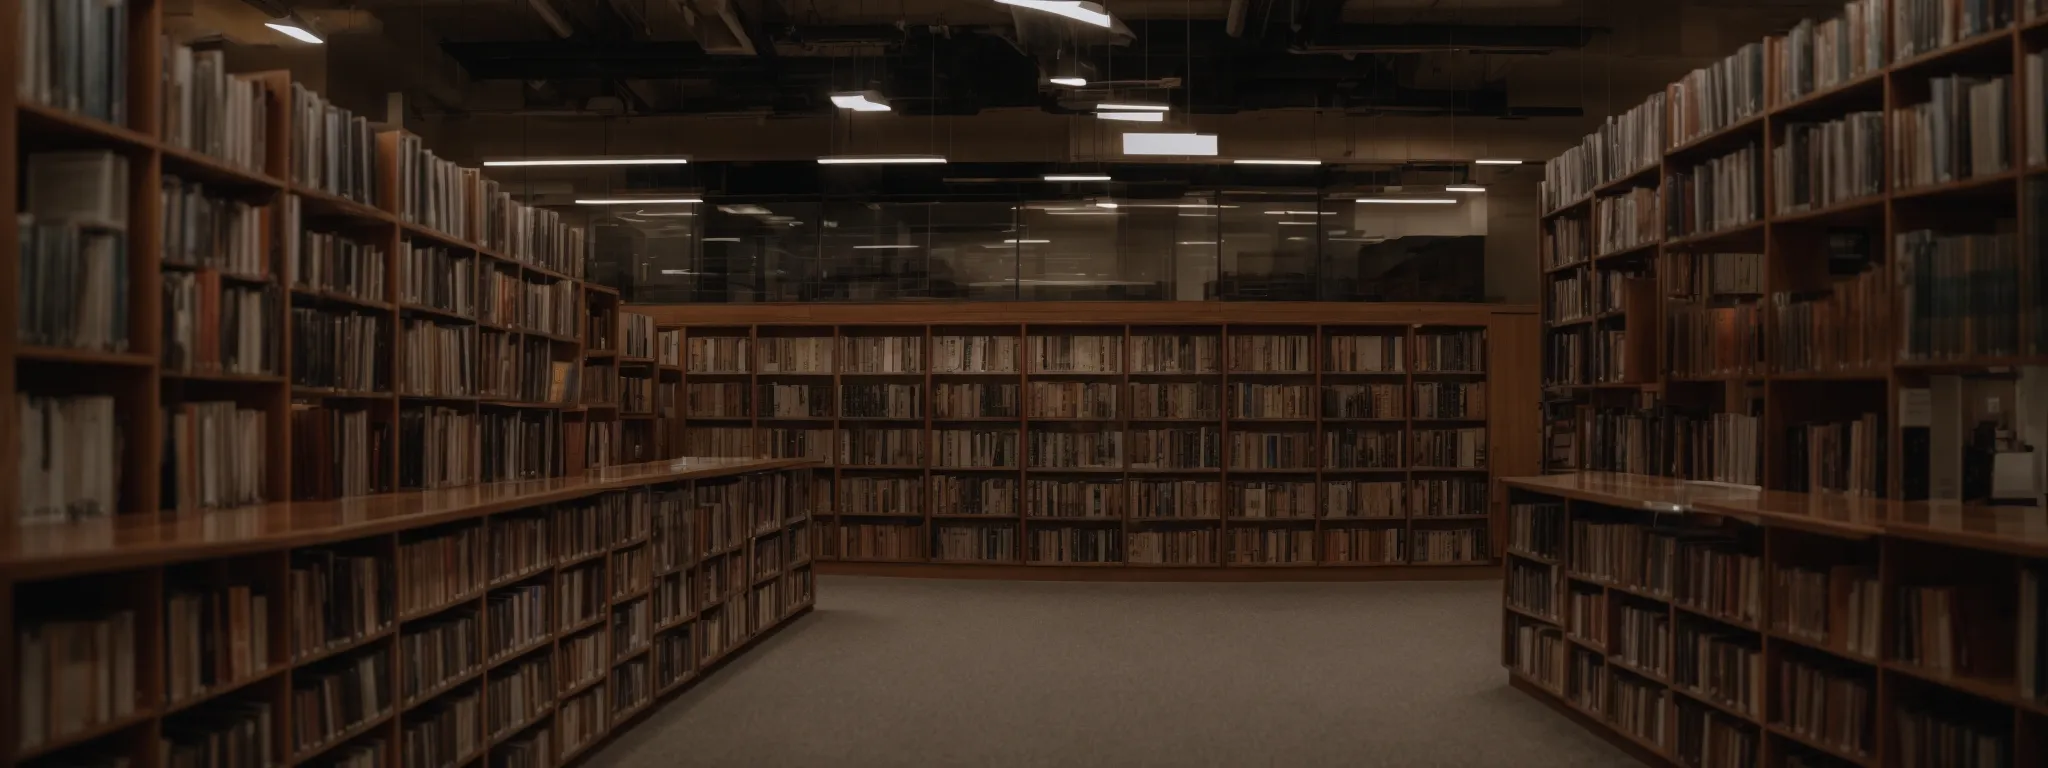 a wide library with rows of books potentially holding seo guides amidst quiet study areas.